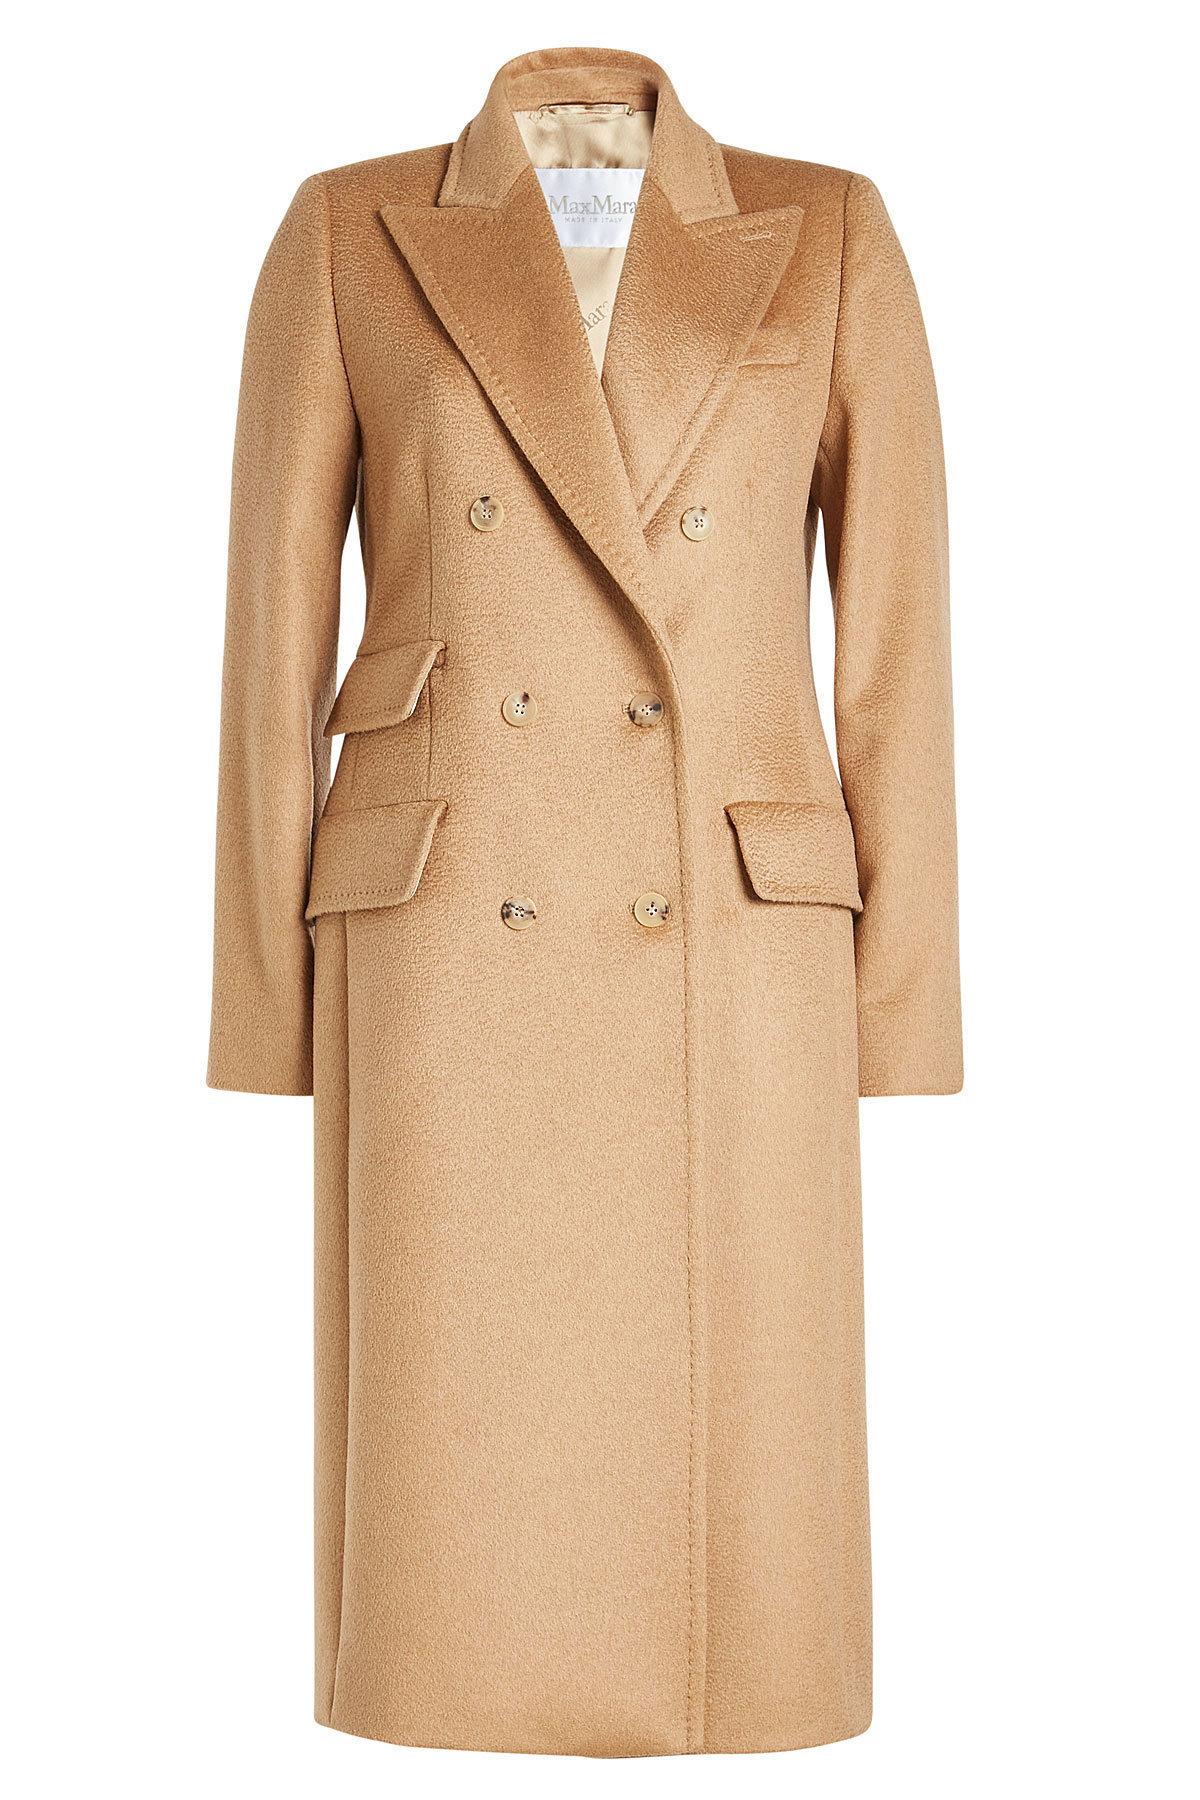 Max Mara Double Breasted Camel Coat In Brown | ModeSens